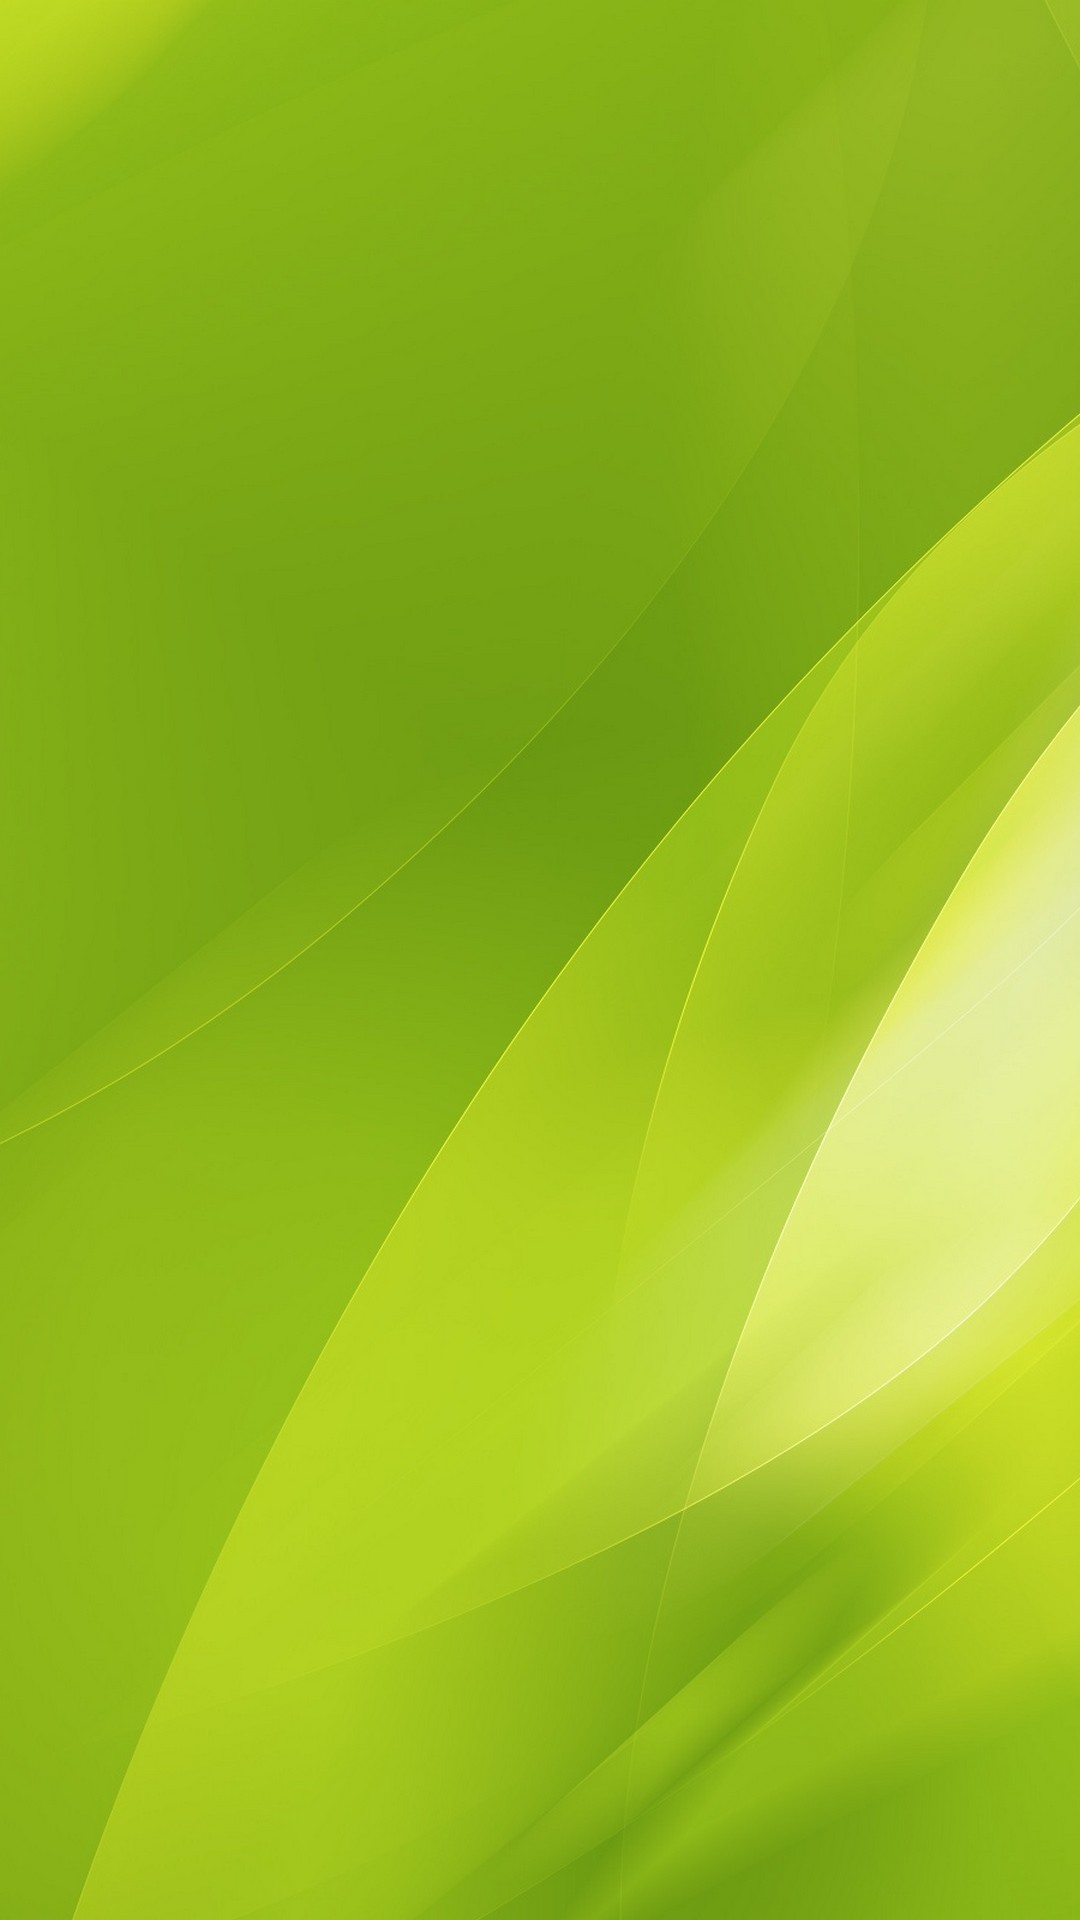 Lime Green Android Wallpaper with resolution 1080X1920 pixel. You can make this wallpaper for your Android backgrounds, Tablet, Smartphones Screensavers and Mobile Phone Lock Screen